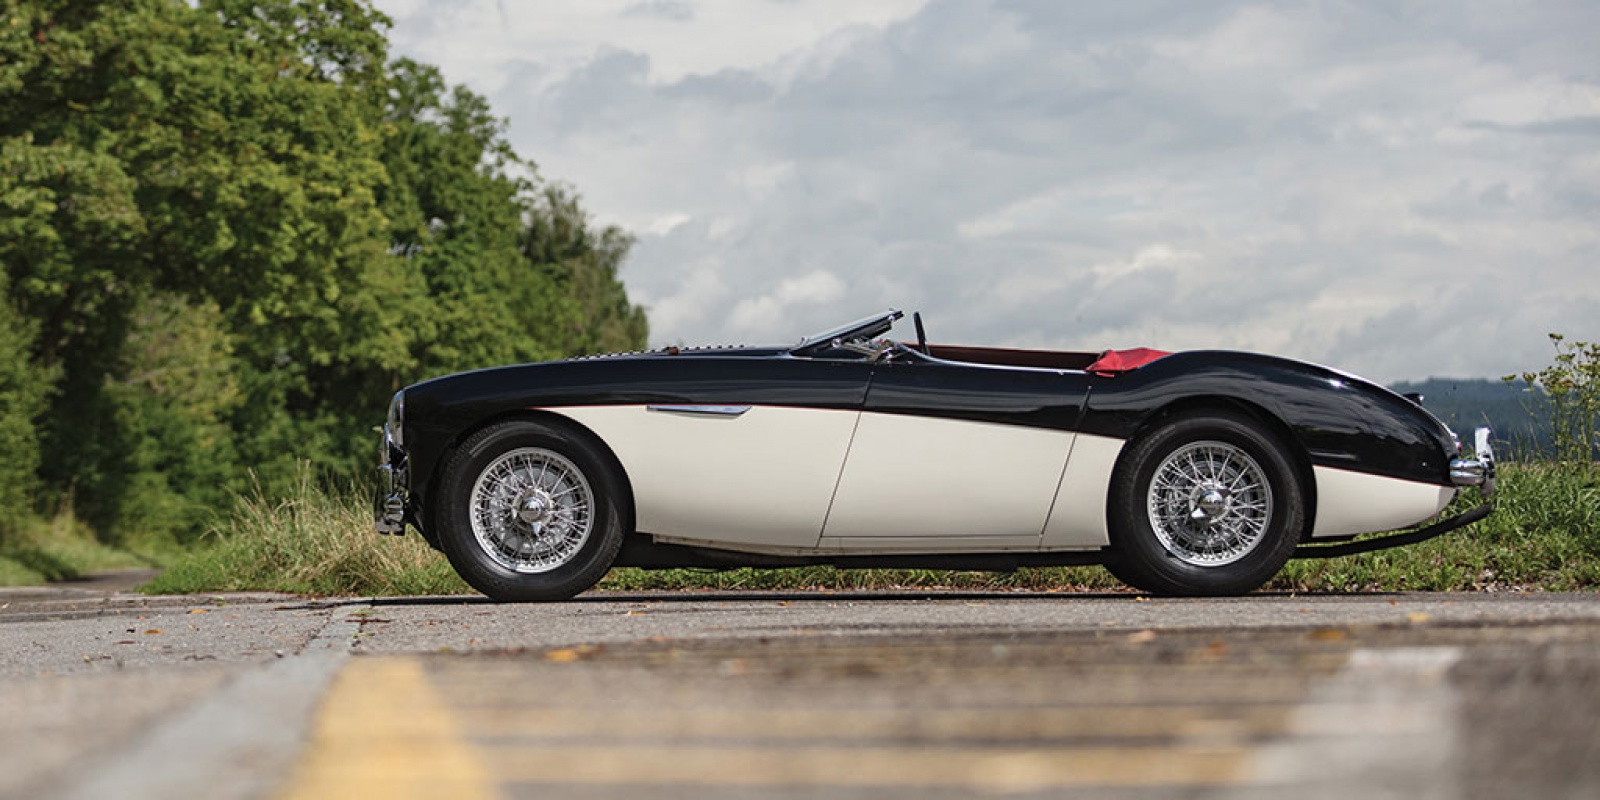 1955 Austin-Healey 100-4 Le Mans Upgrade from new